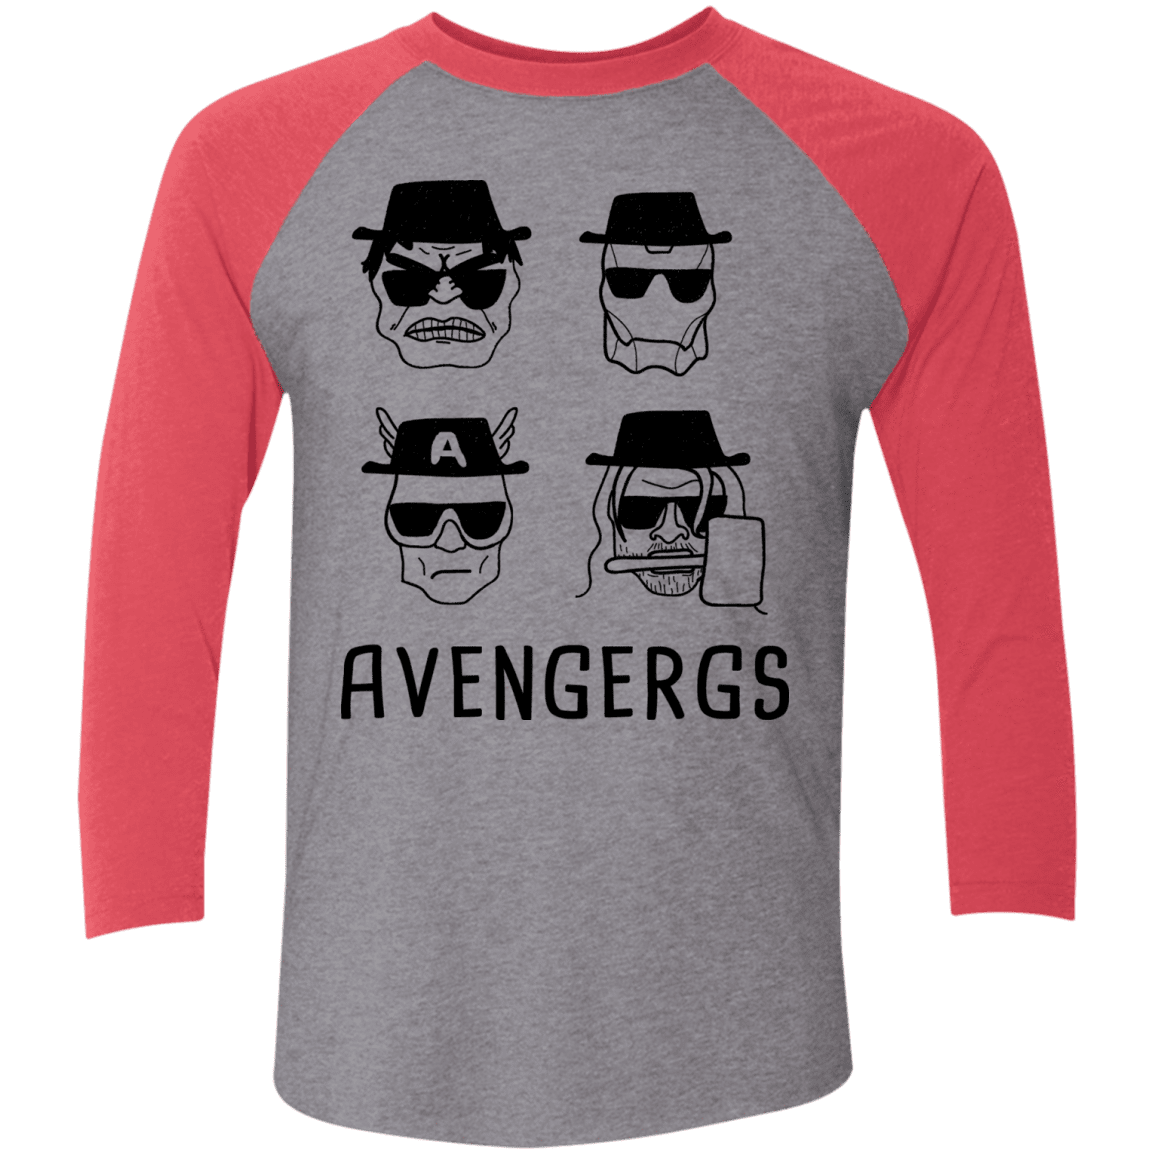 T-Shirts Premium Heather/Vintage Red / X-Small Avengergs Men's Triblend 3/4 Sleeve